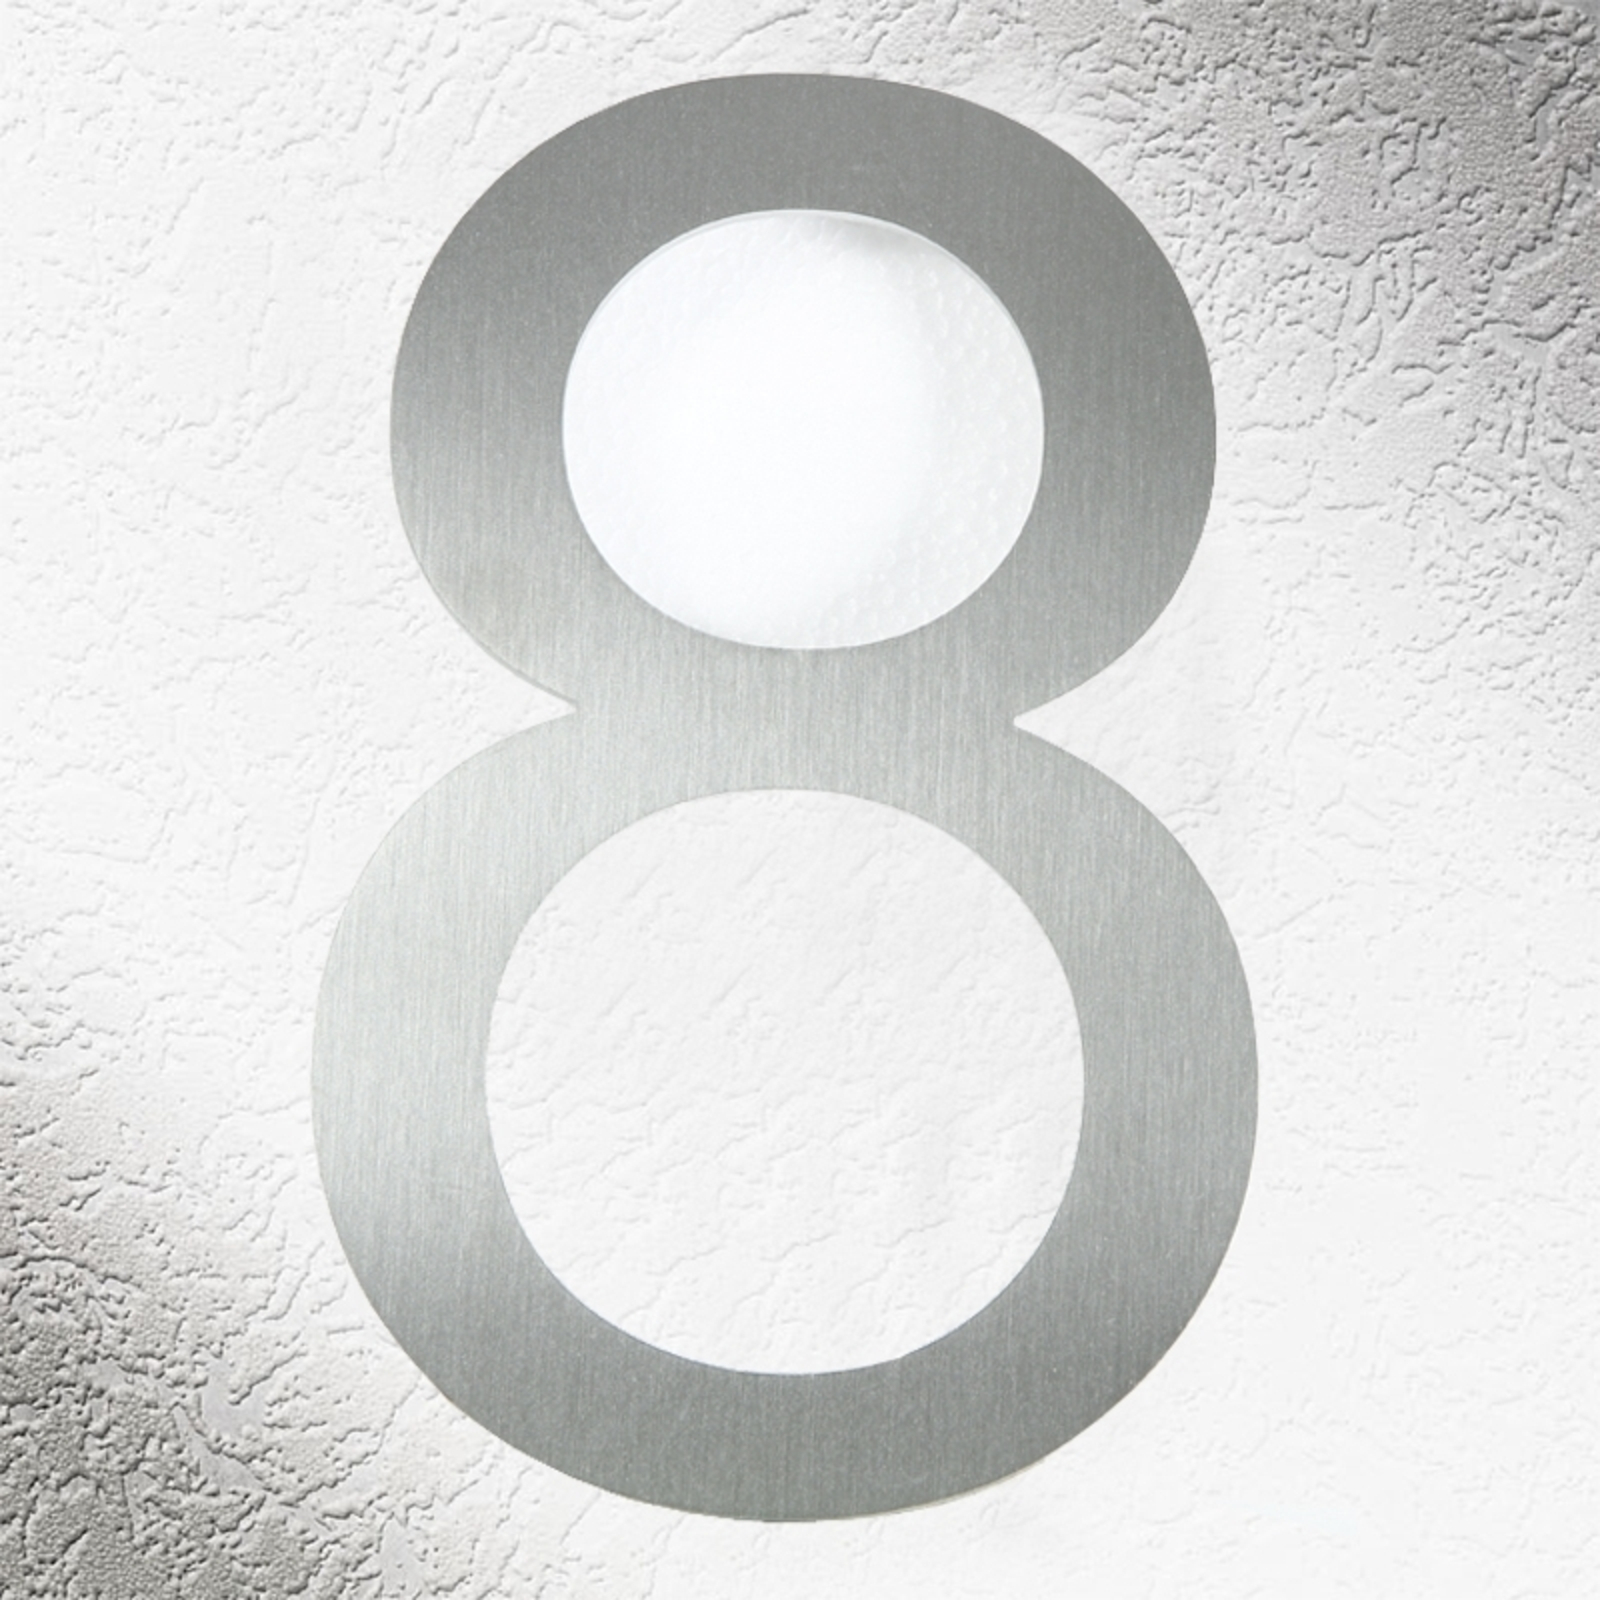 High Quality House Numbers made of Stainless 8